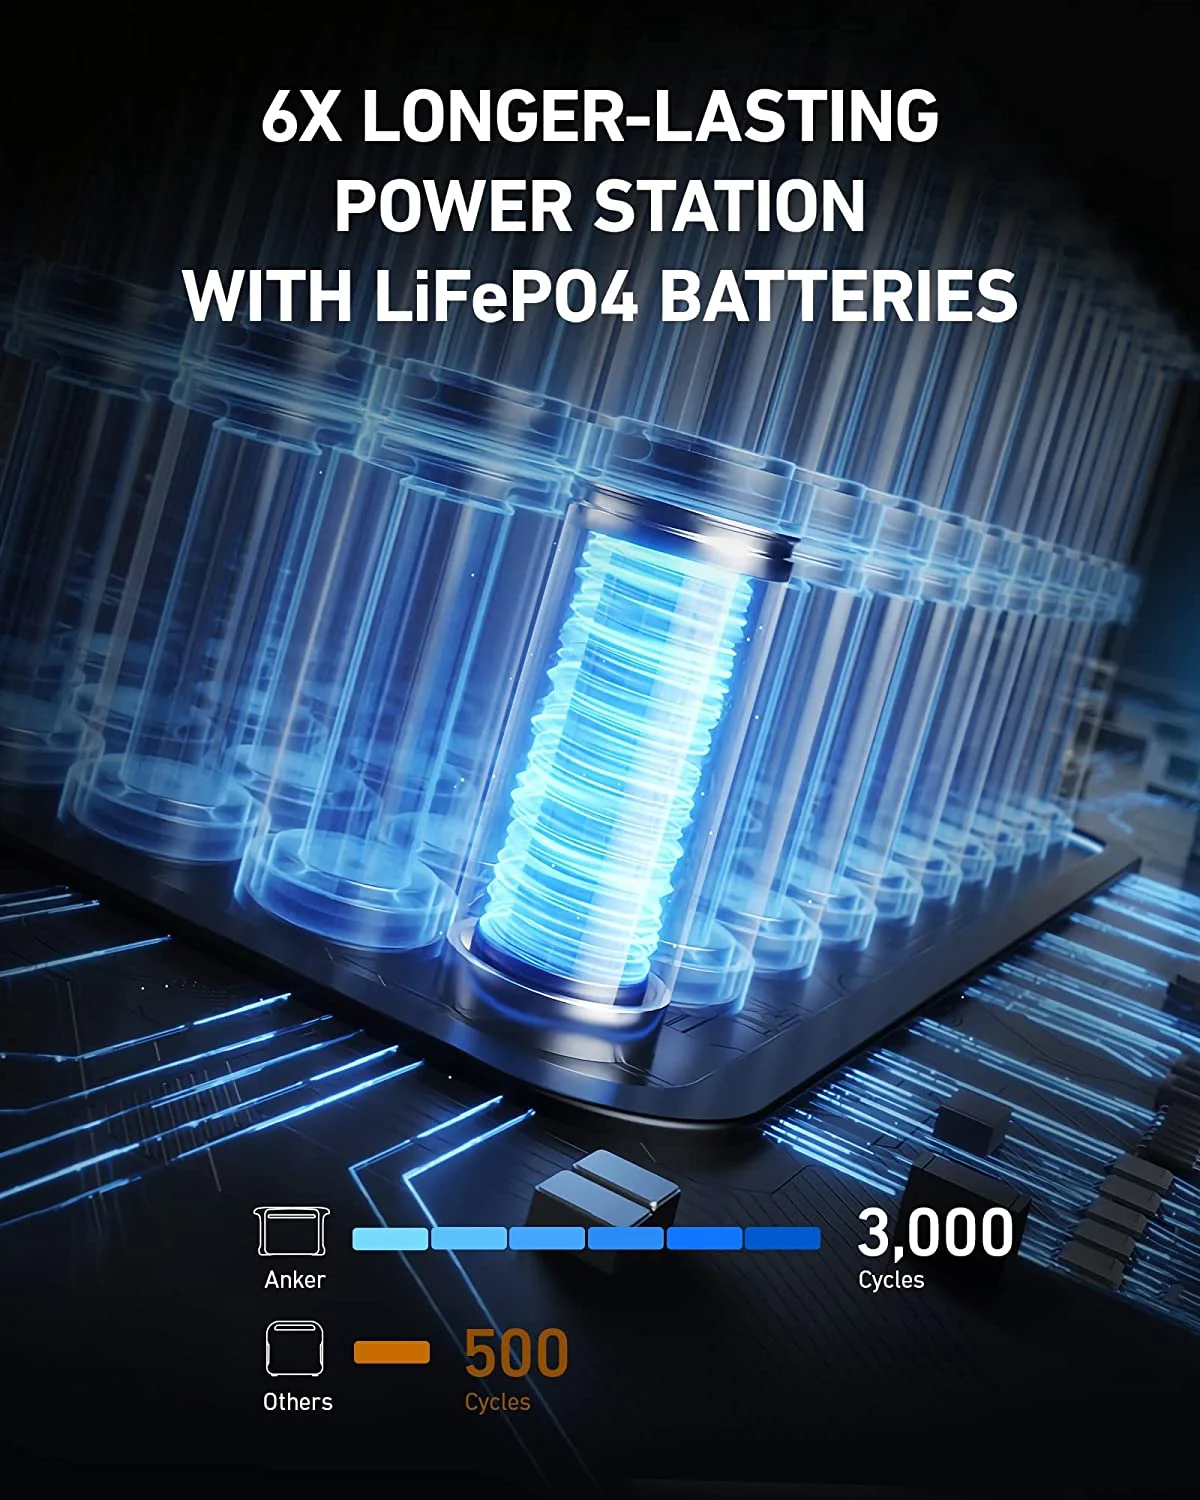 6x longer lasting power with emergency food storage and Lifepo4 station batteries.